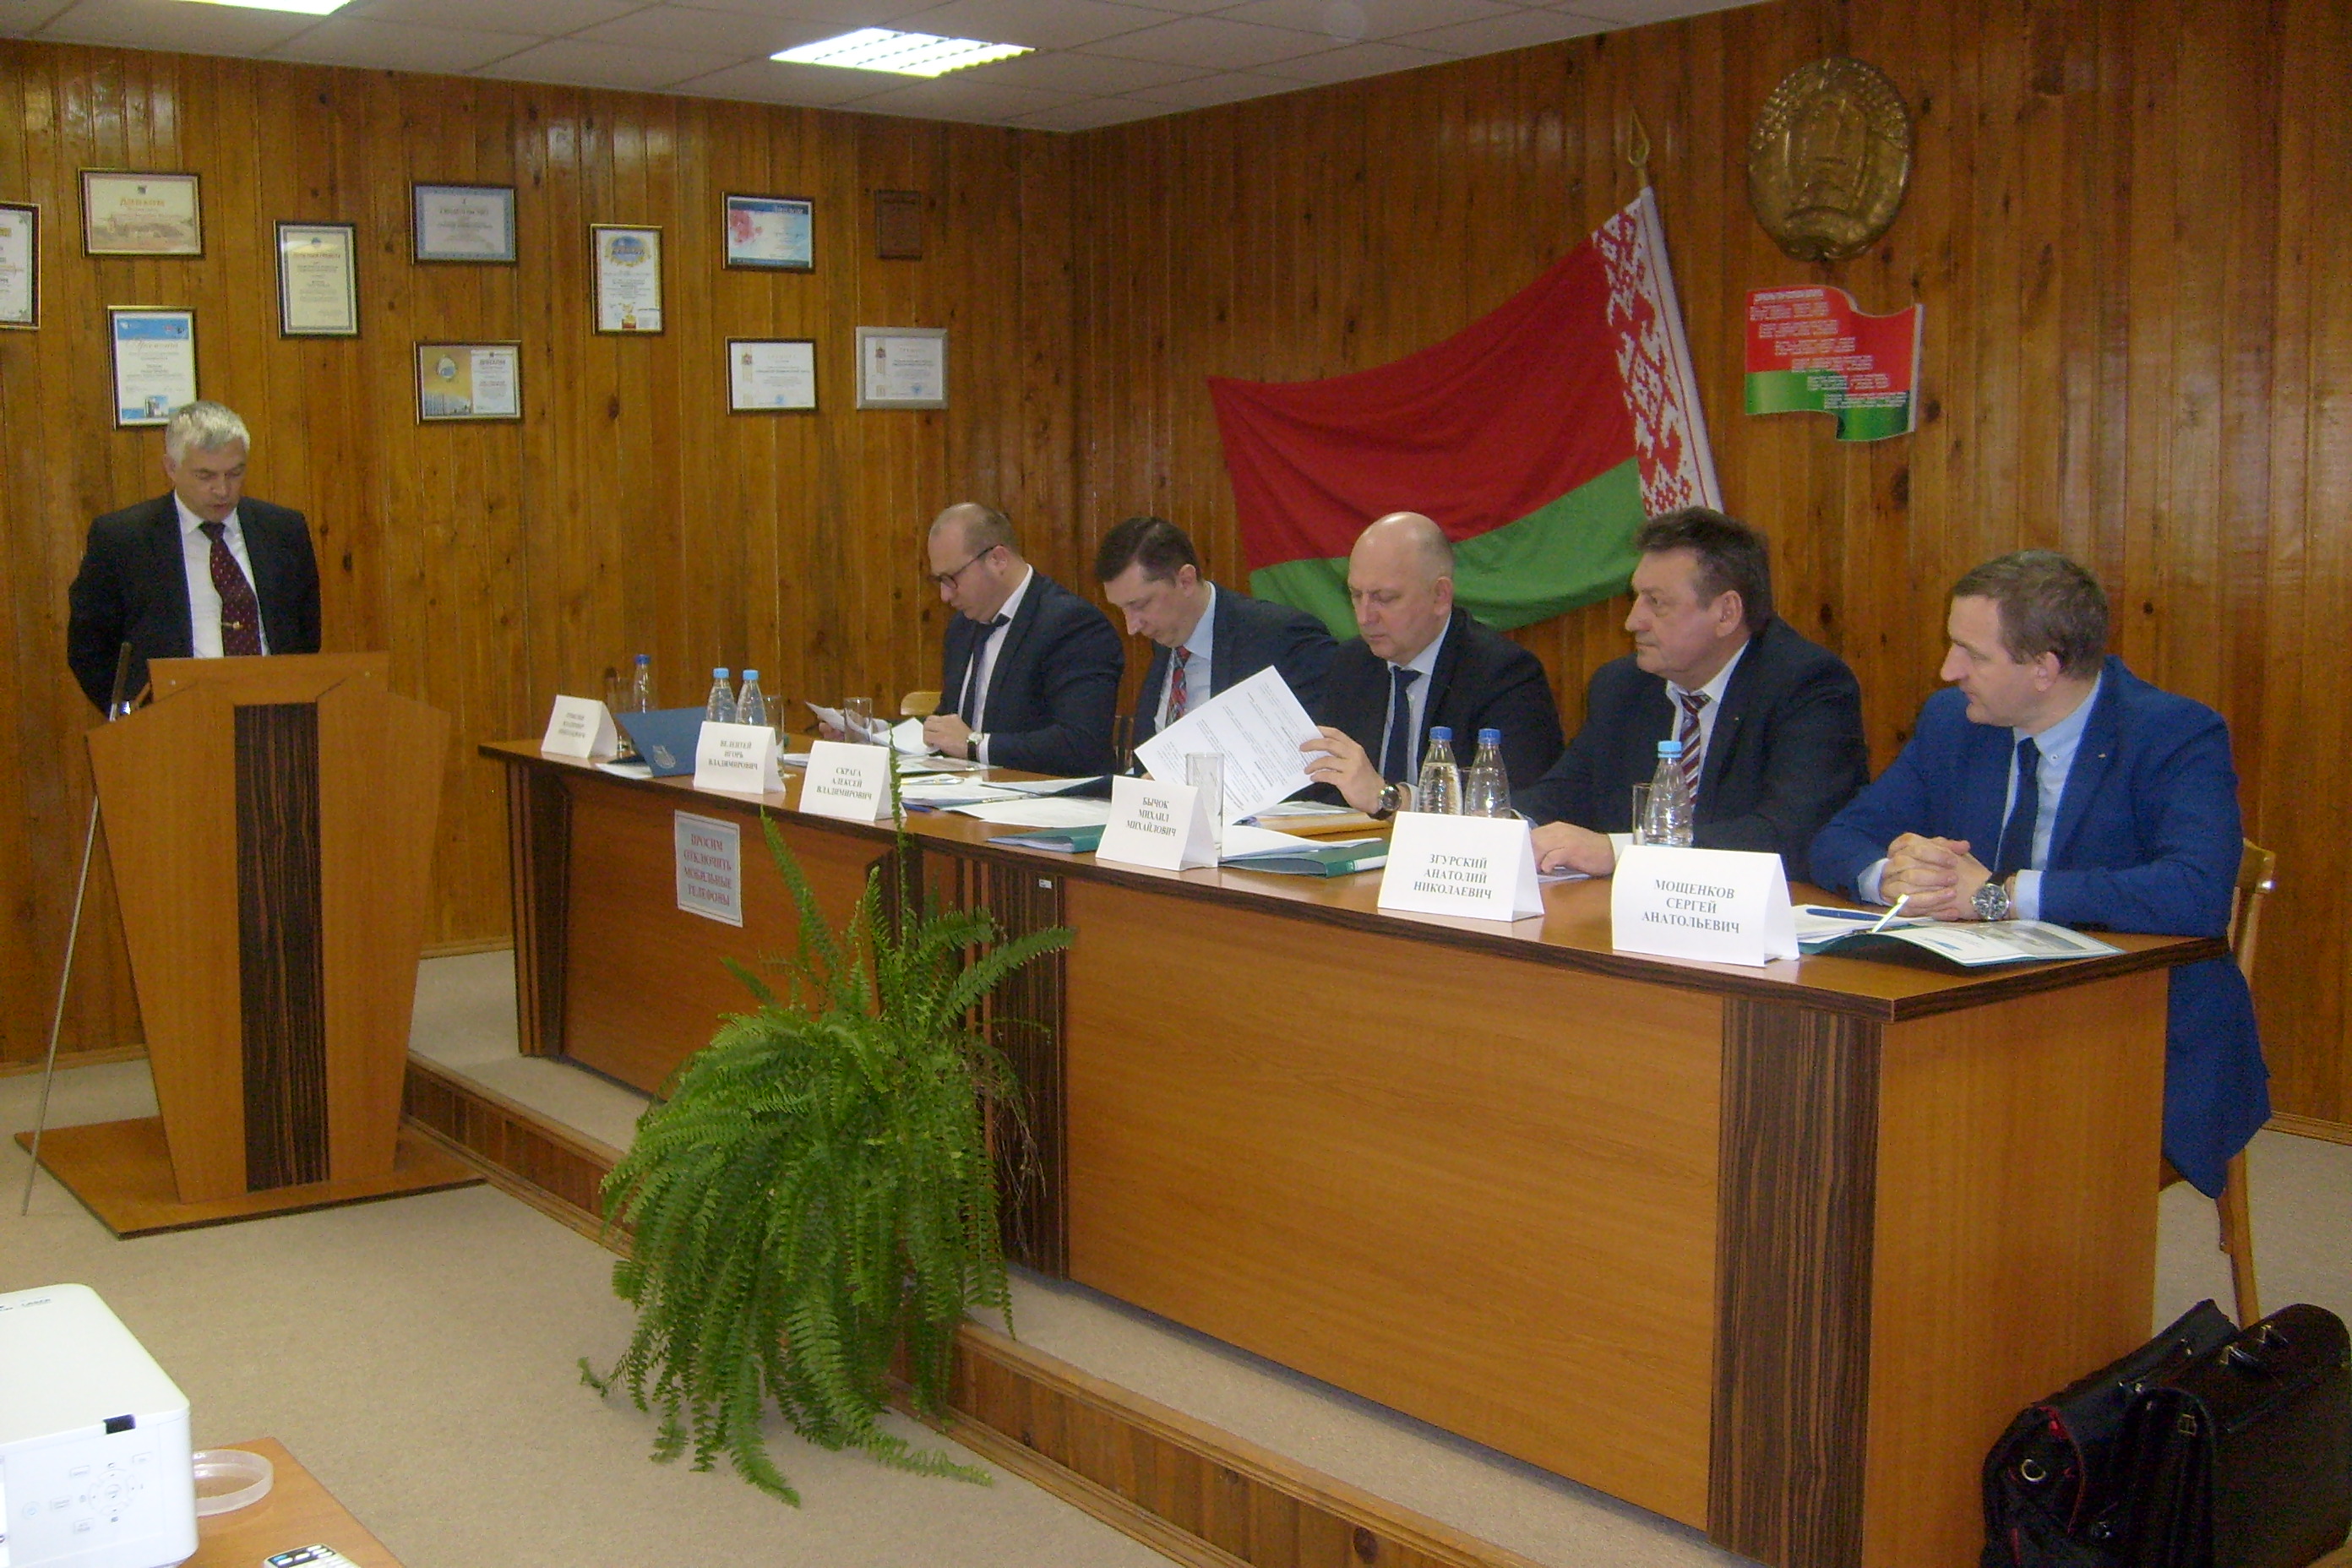 Meeting of shareholders of Orsha Aircraft Repair Plant OJSC 